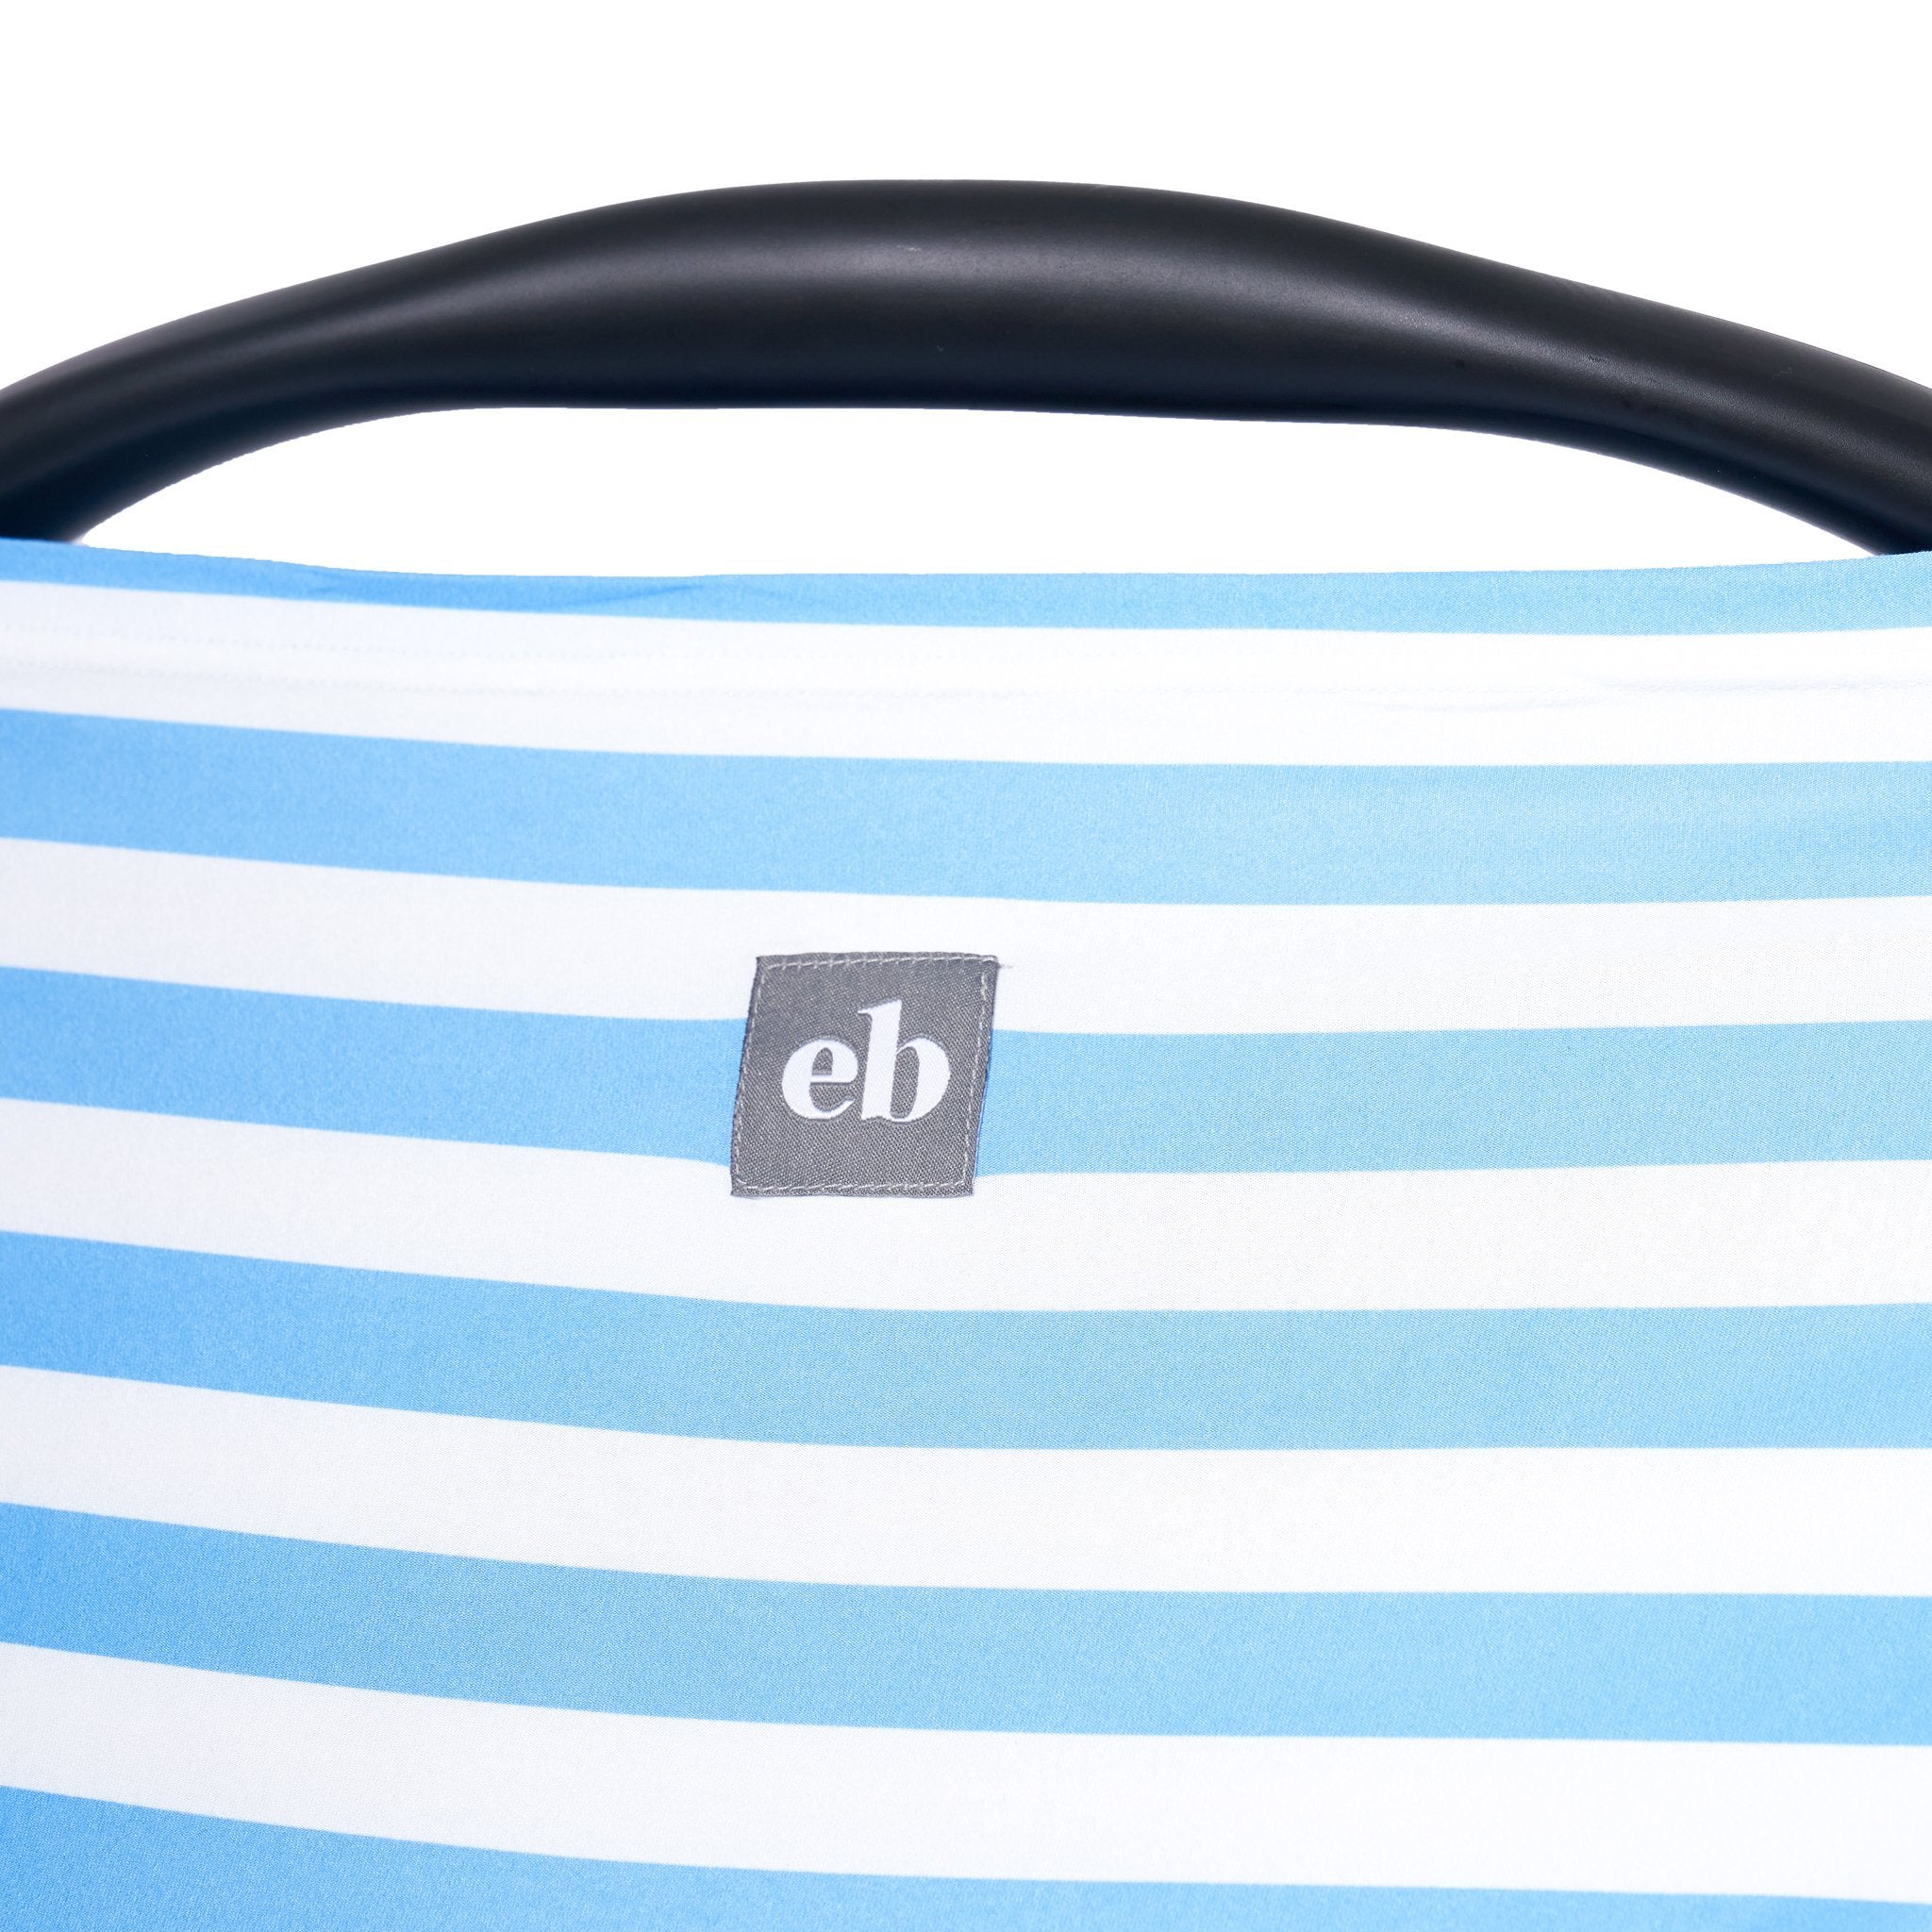 Breathable Nursing Cover | Travel Essential Shopping Cart Cover | Multi-Use Breastfeeding Cover | Functional High Chair Cover | Infinity Scarf | Blue and White Striped - EliteBaby